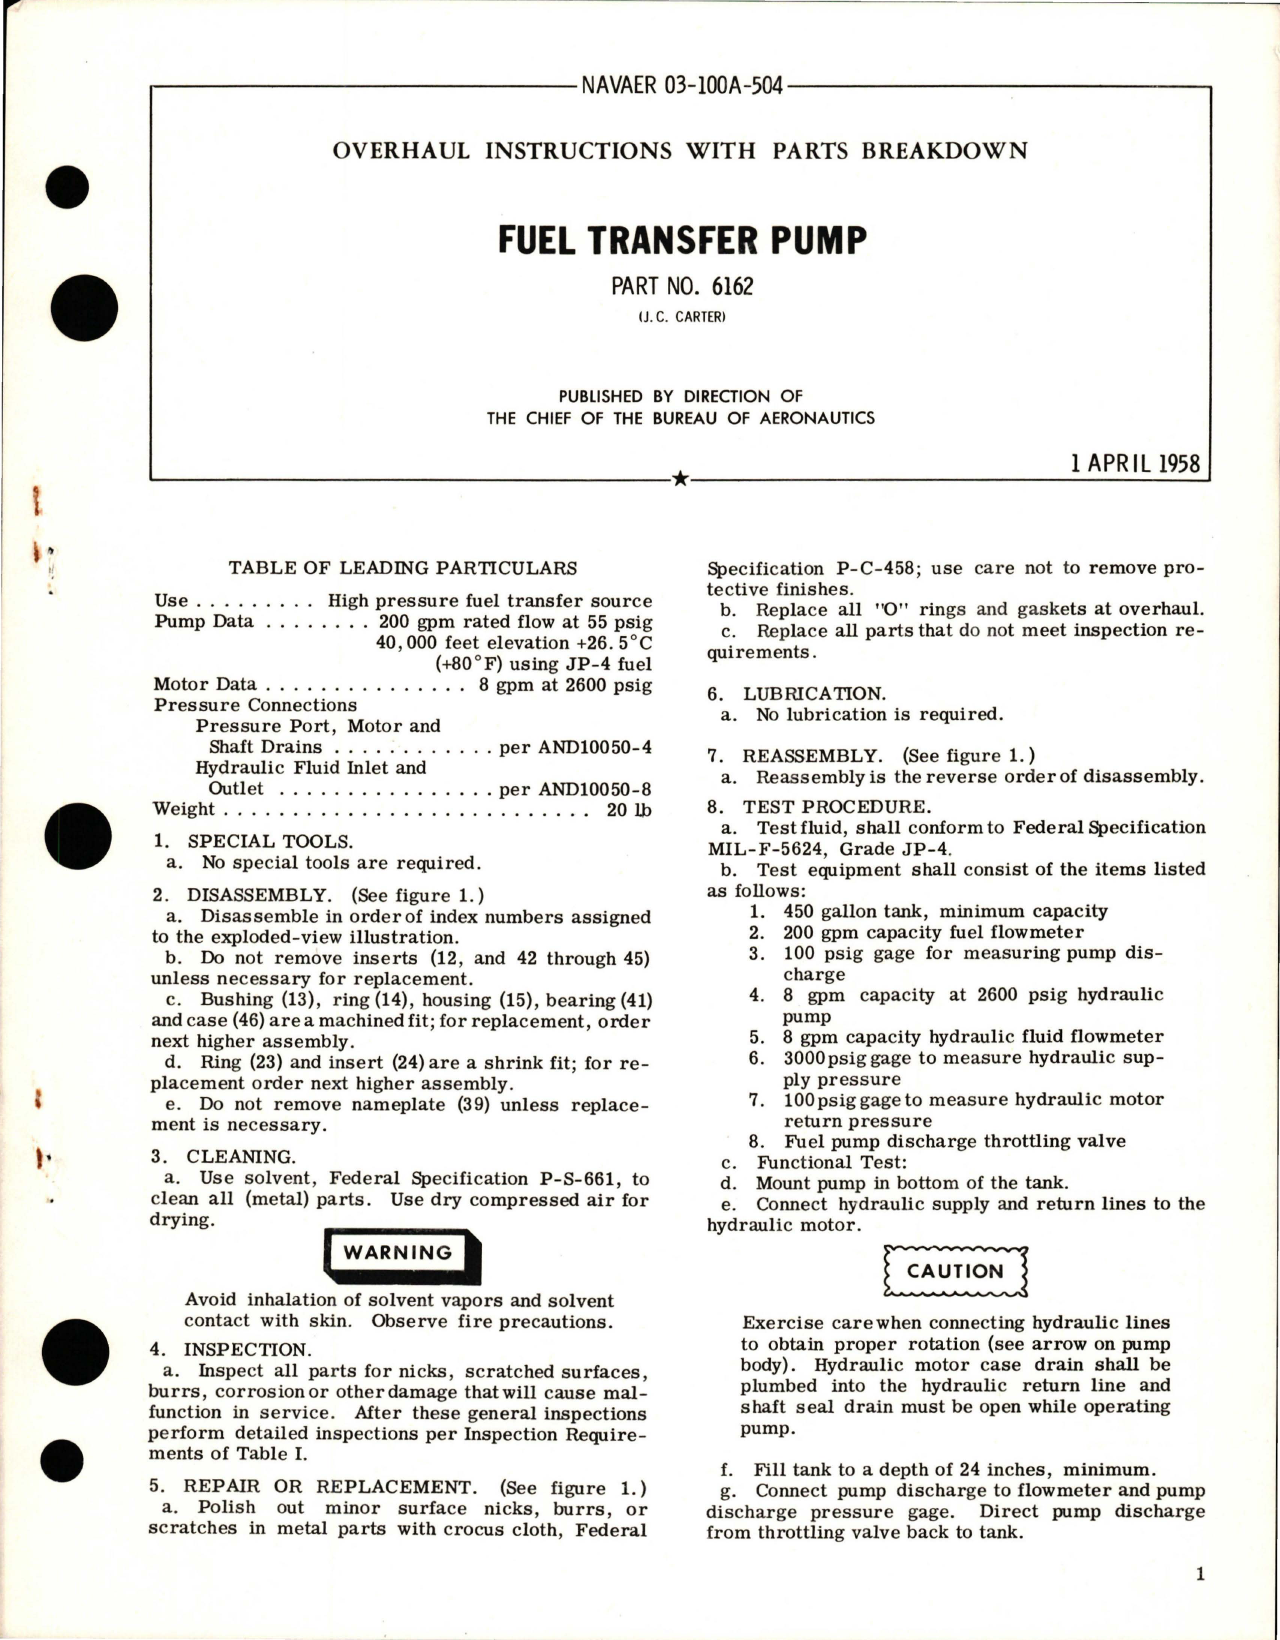 Sample page 1 from AirCorps Library document: Overhaul Instructions with Parts Breakdown for Fuel Transfer Pump - Part 6162